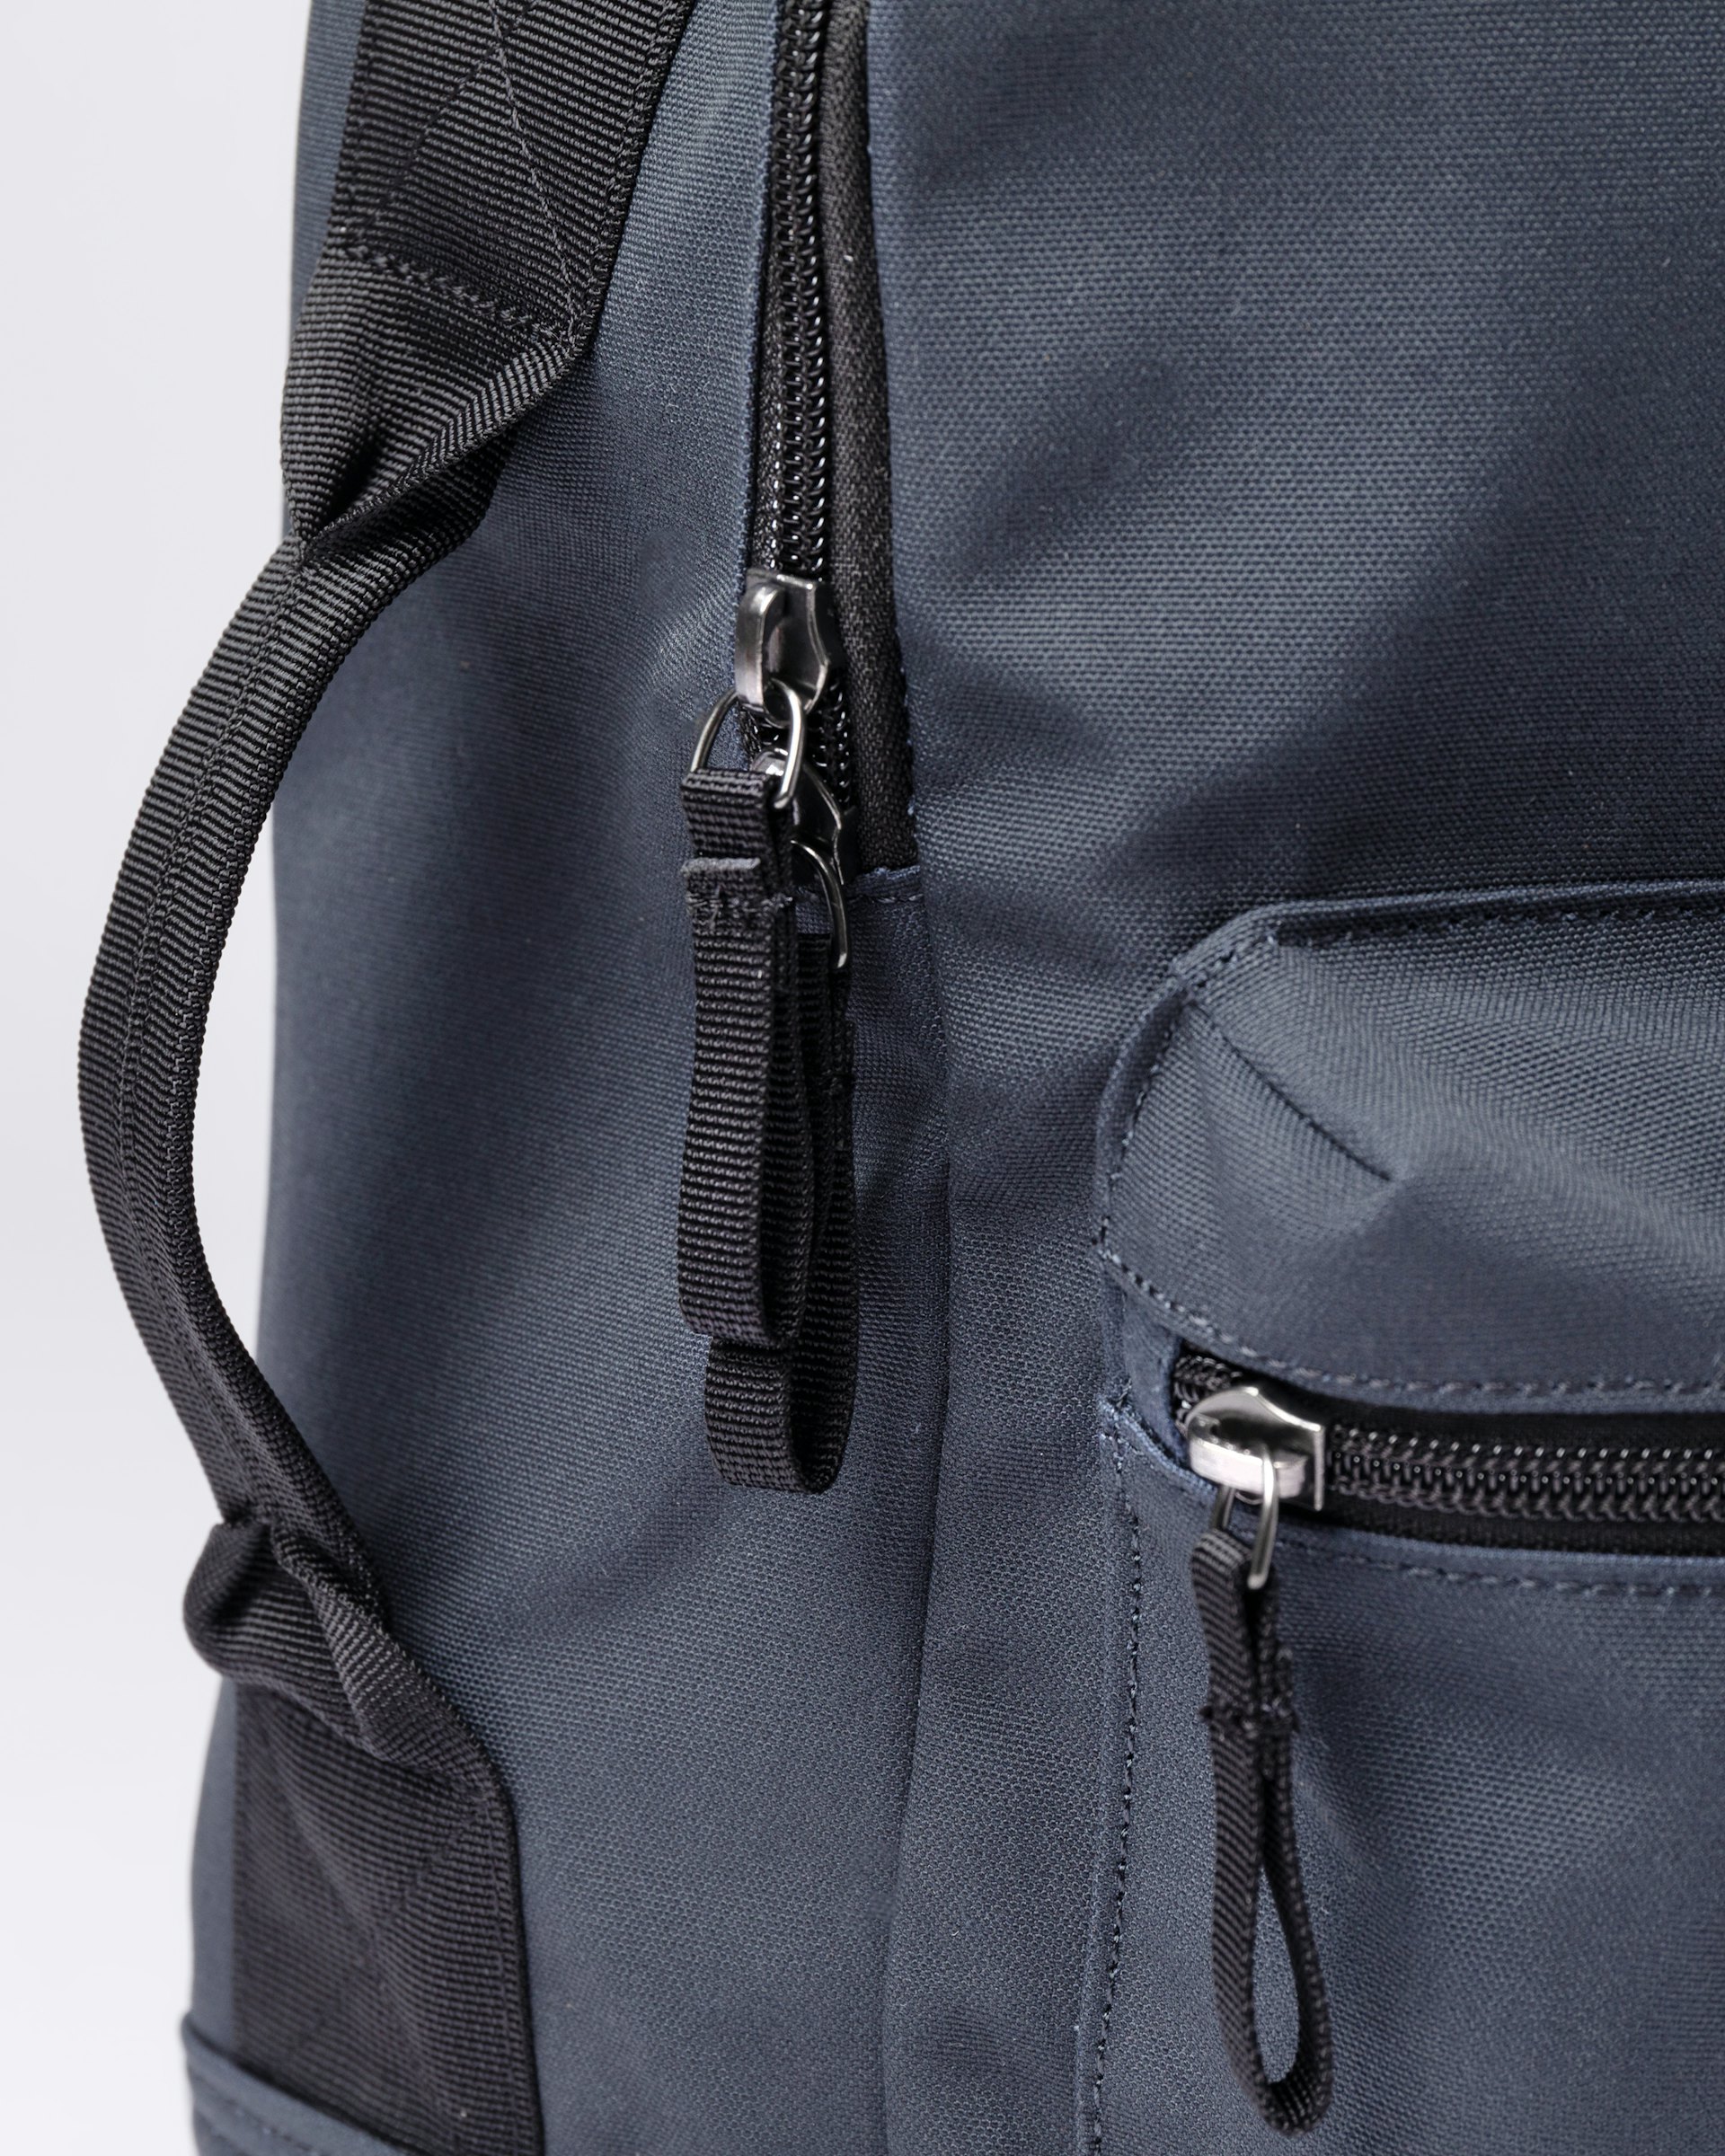 August belongs to the category Backpacks and is in color navy (3 of 4)